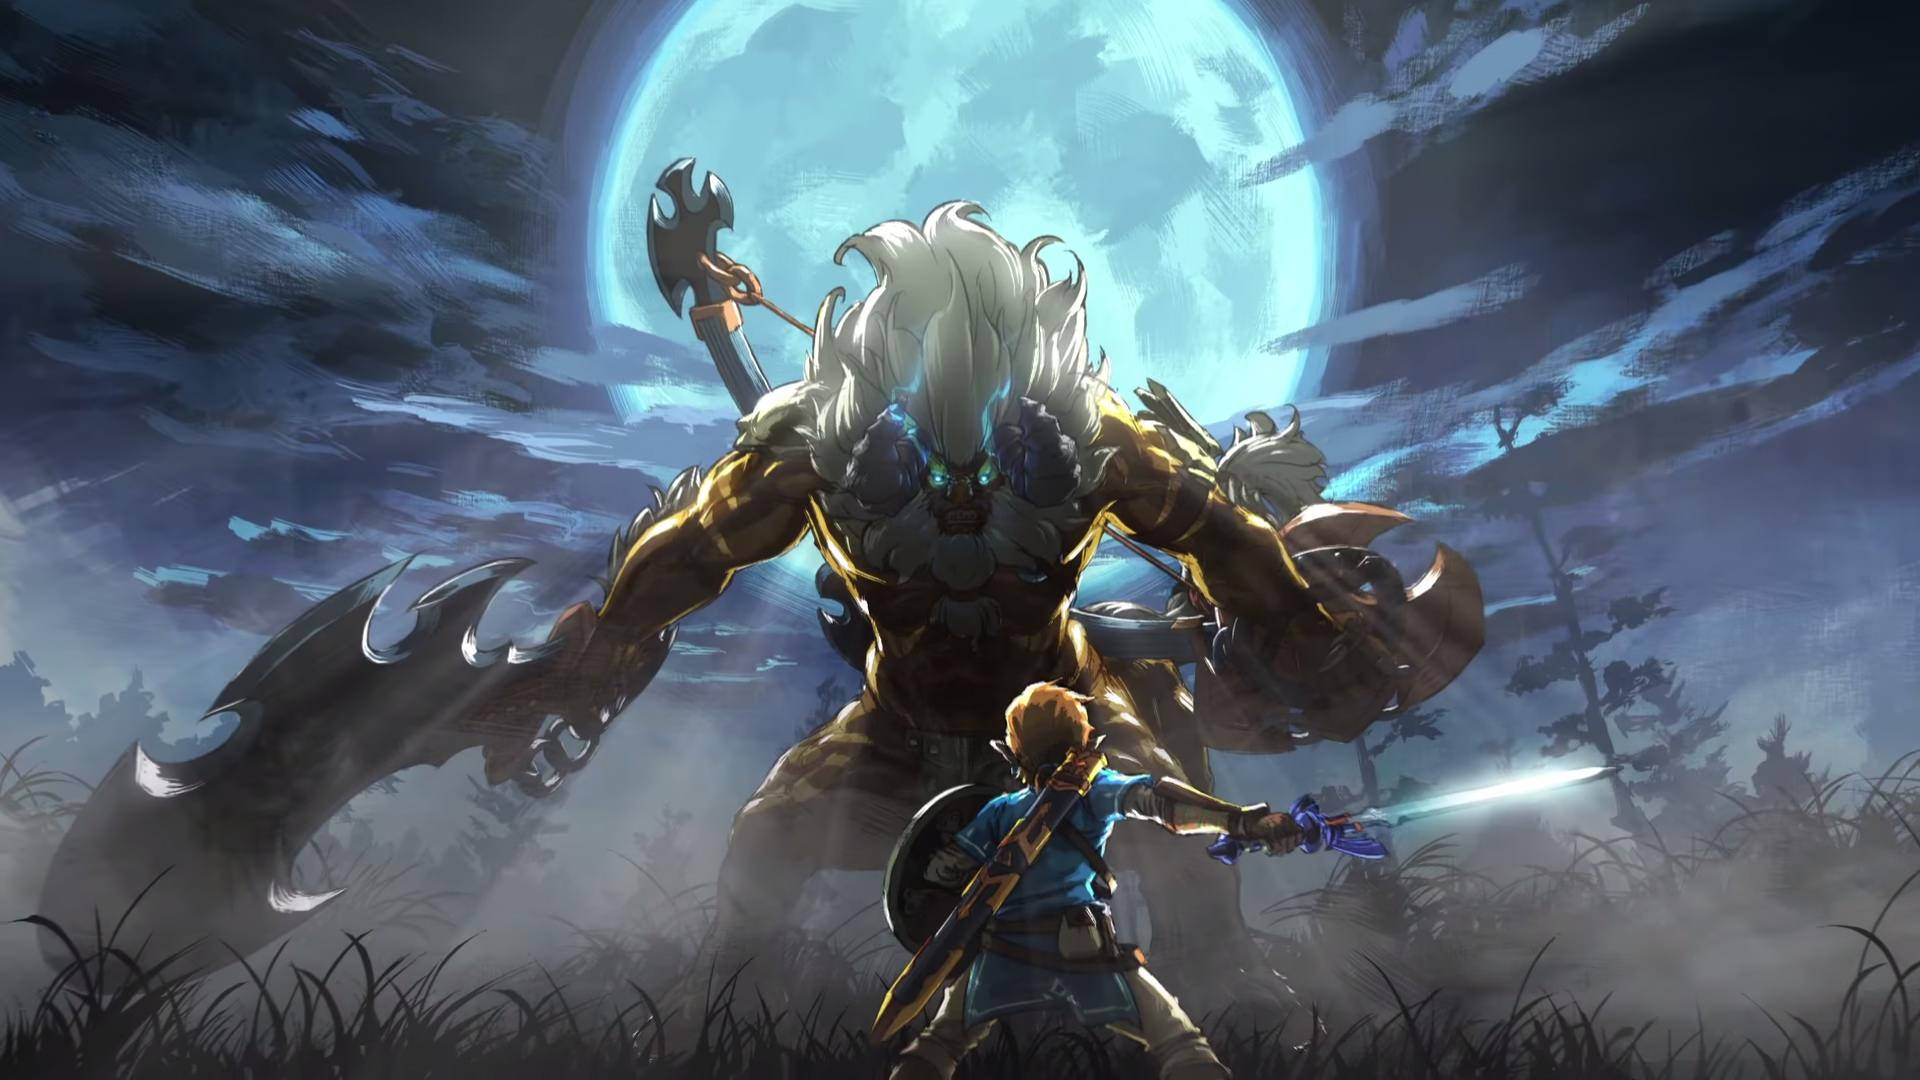 Cool Hd Breath Of The Wild Epic Battle Wallpaper